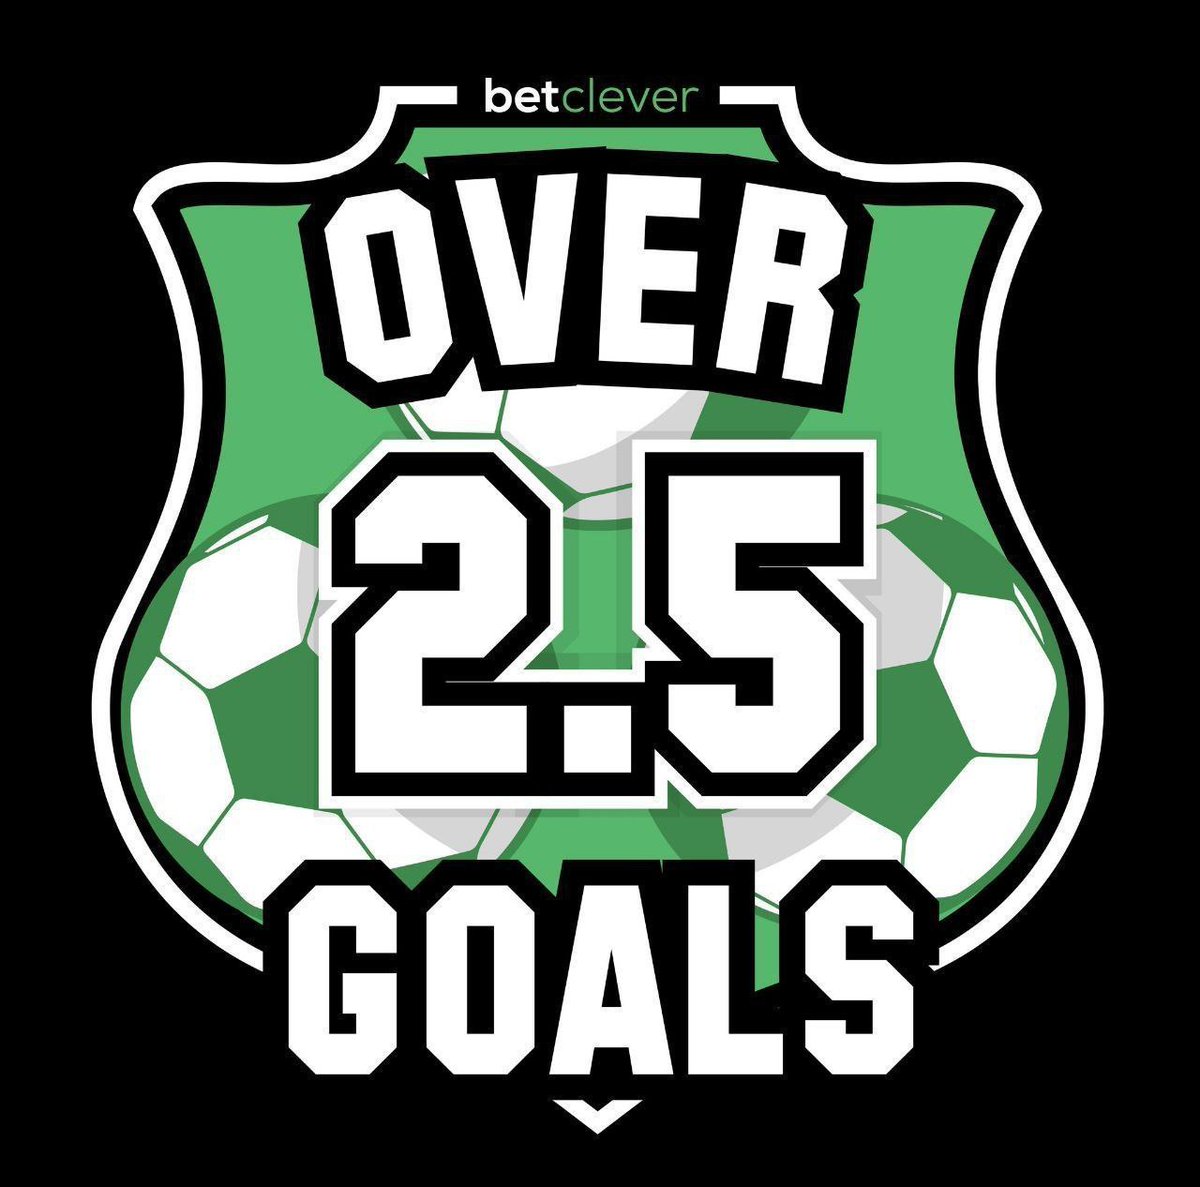 Liking the look of today's Over 2.5 Goals double which is currently returning £23 from a £10 stake. View here 👉 bit.ly/47pFCPQ 🔞|begambleaware